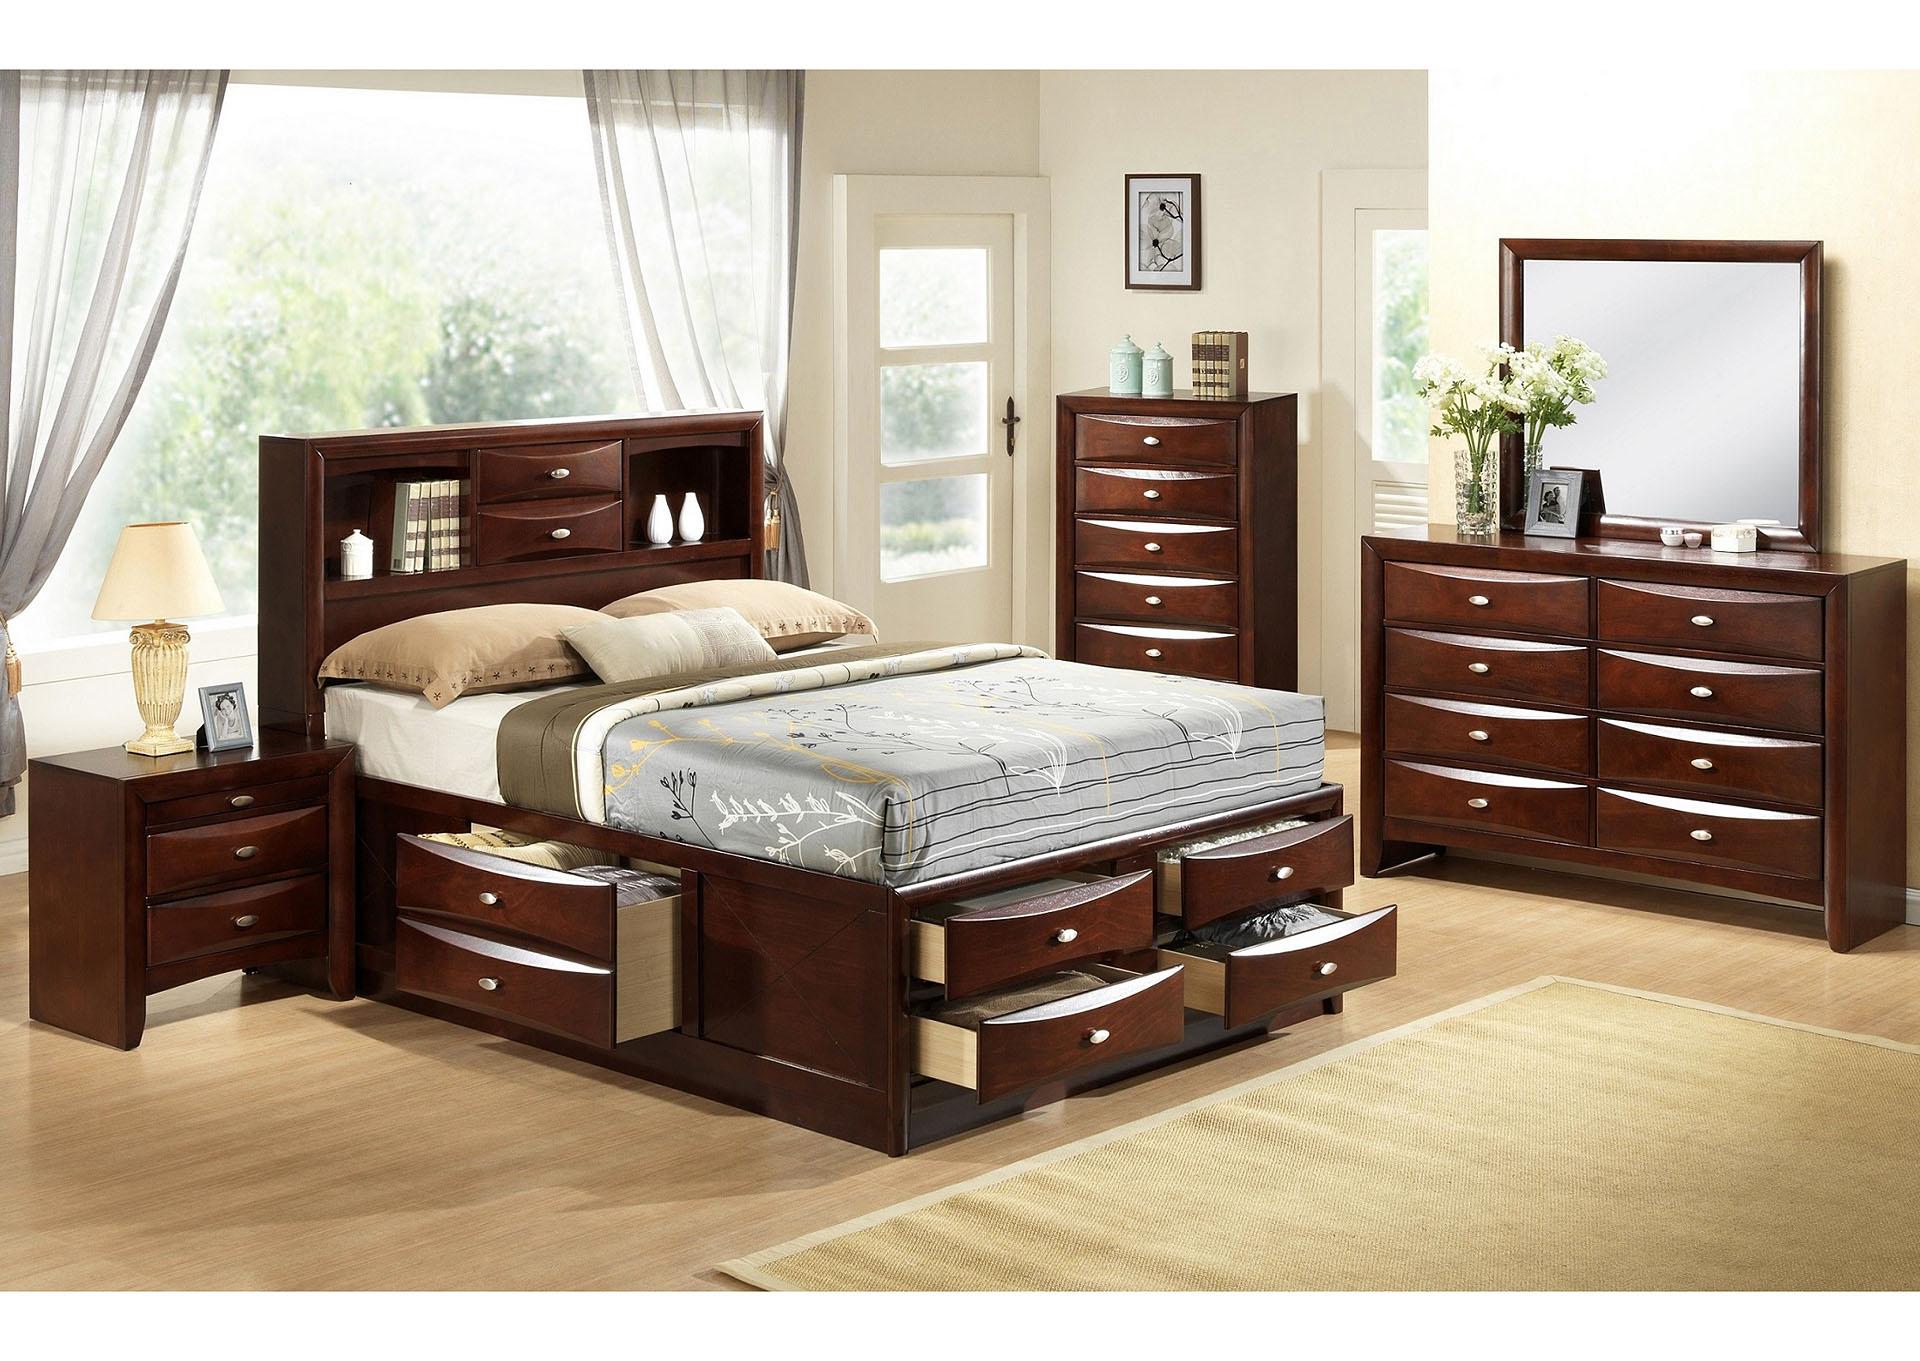 Contemporary, Modern Storage Bedroom Set EMILY GHF-808857653017 in Cherry 